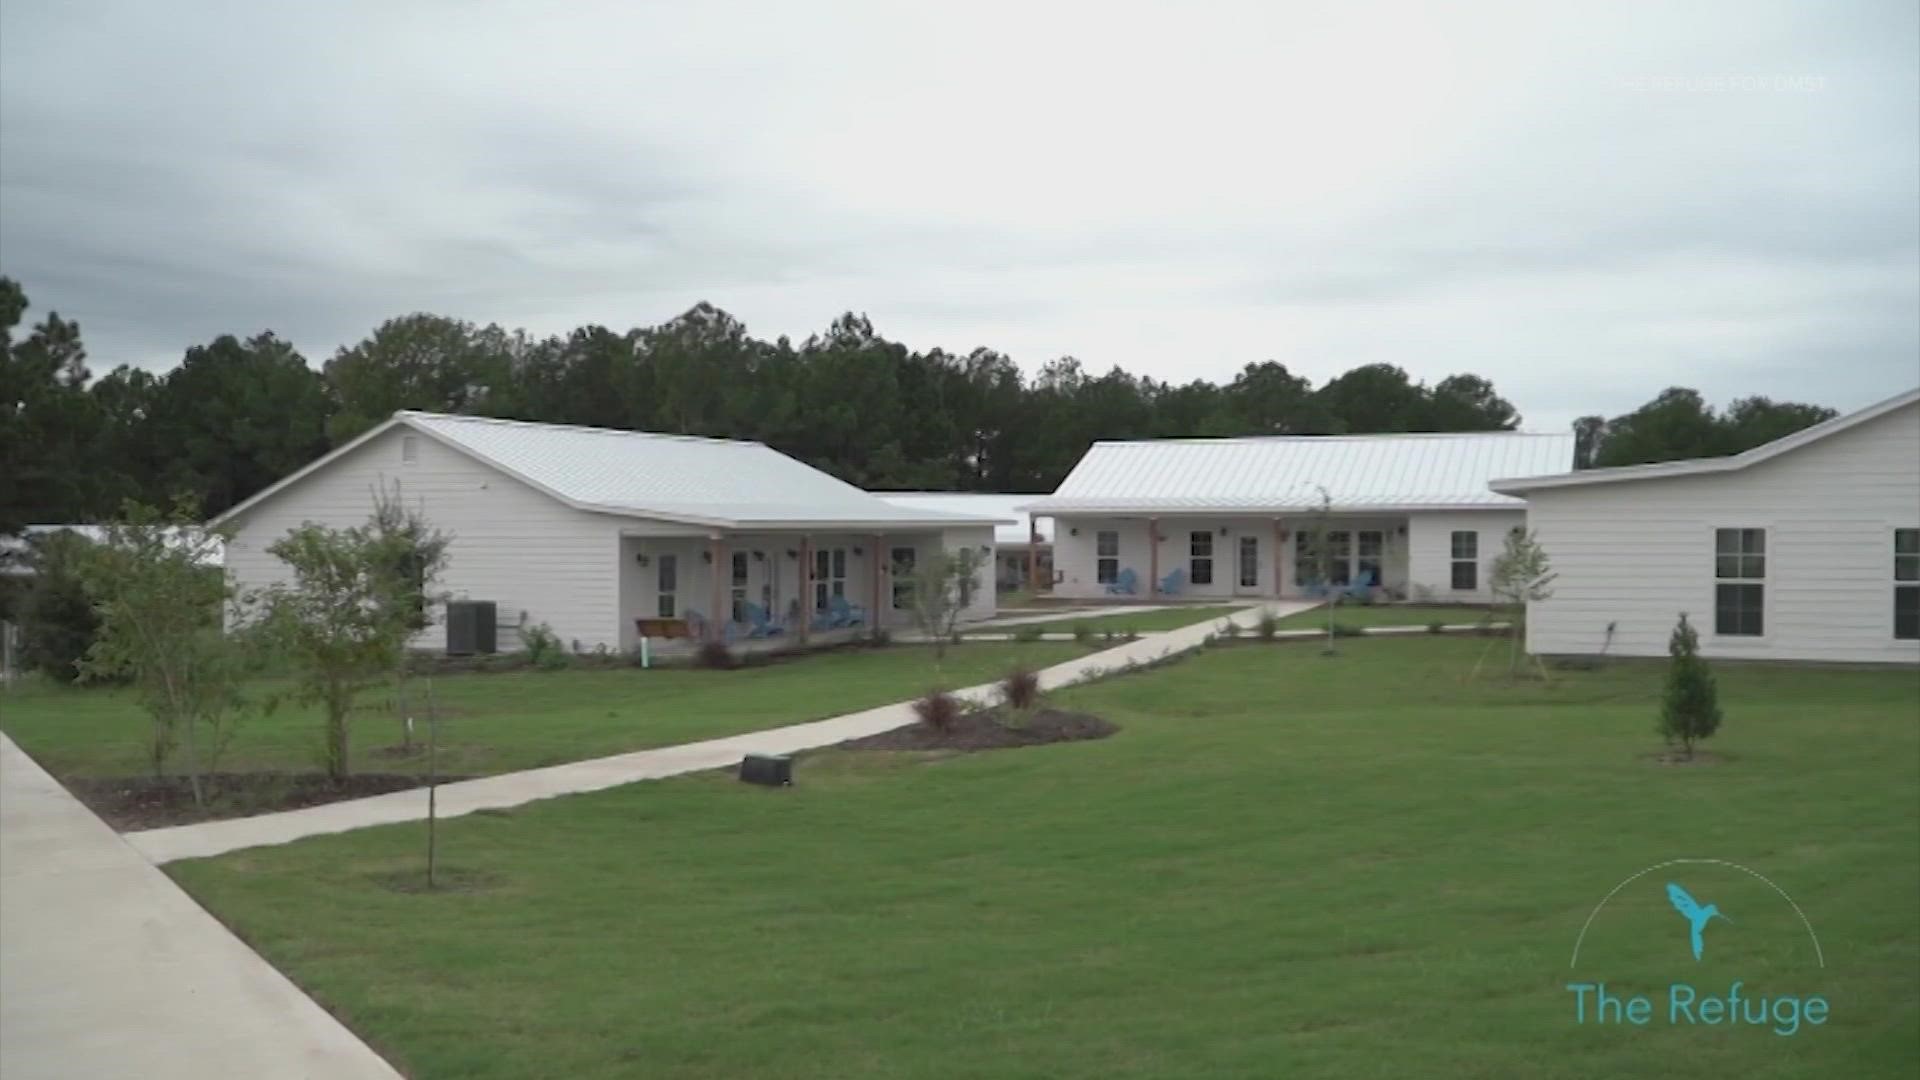 The children were sexually abused and neglected while at The Refuge, a Bastrop facility contracted by the state, according to a report from a current employee.